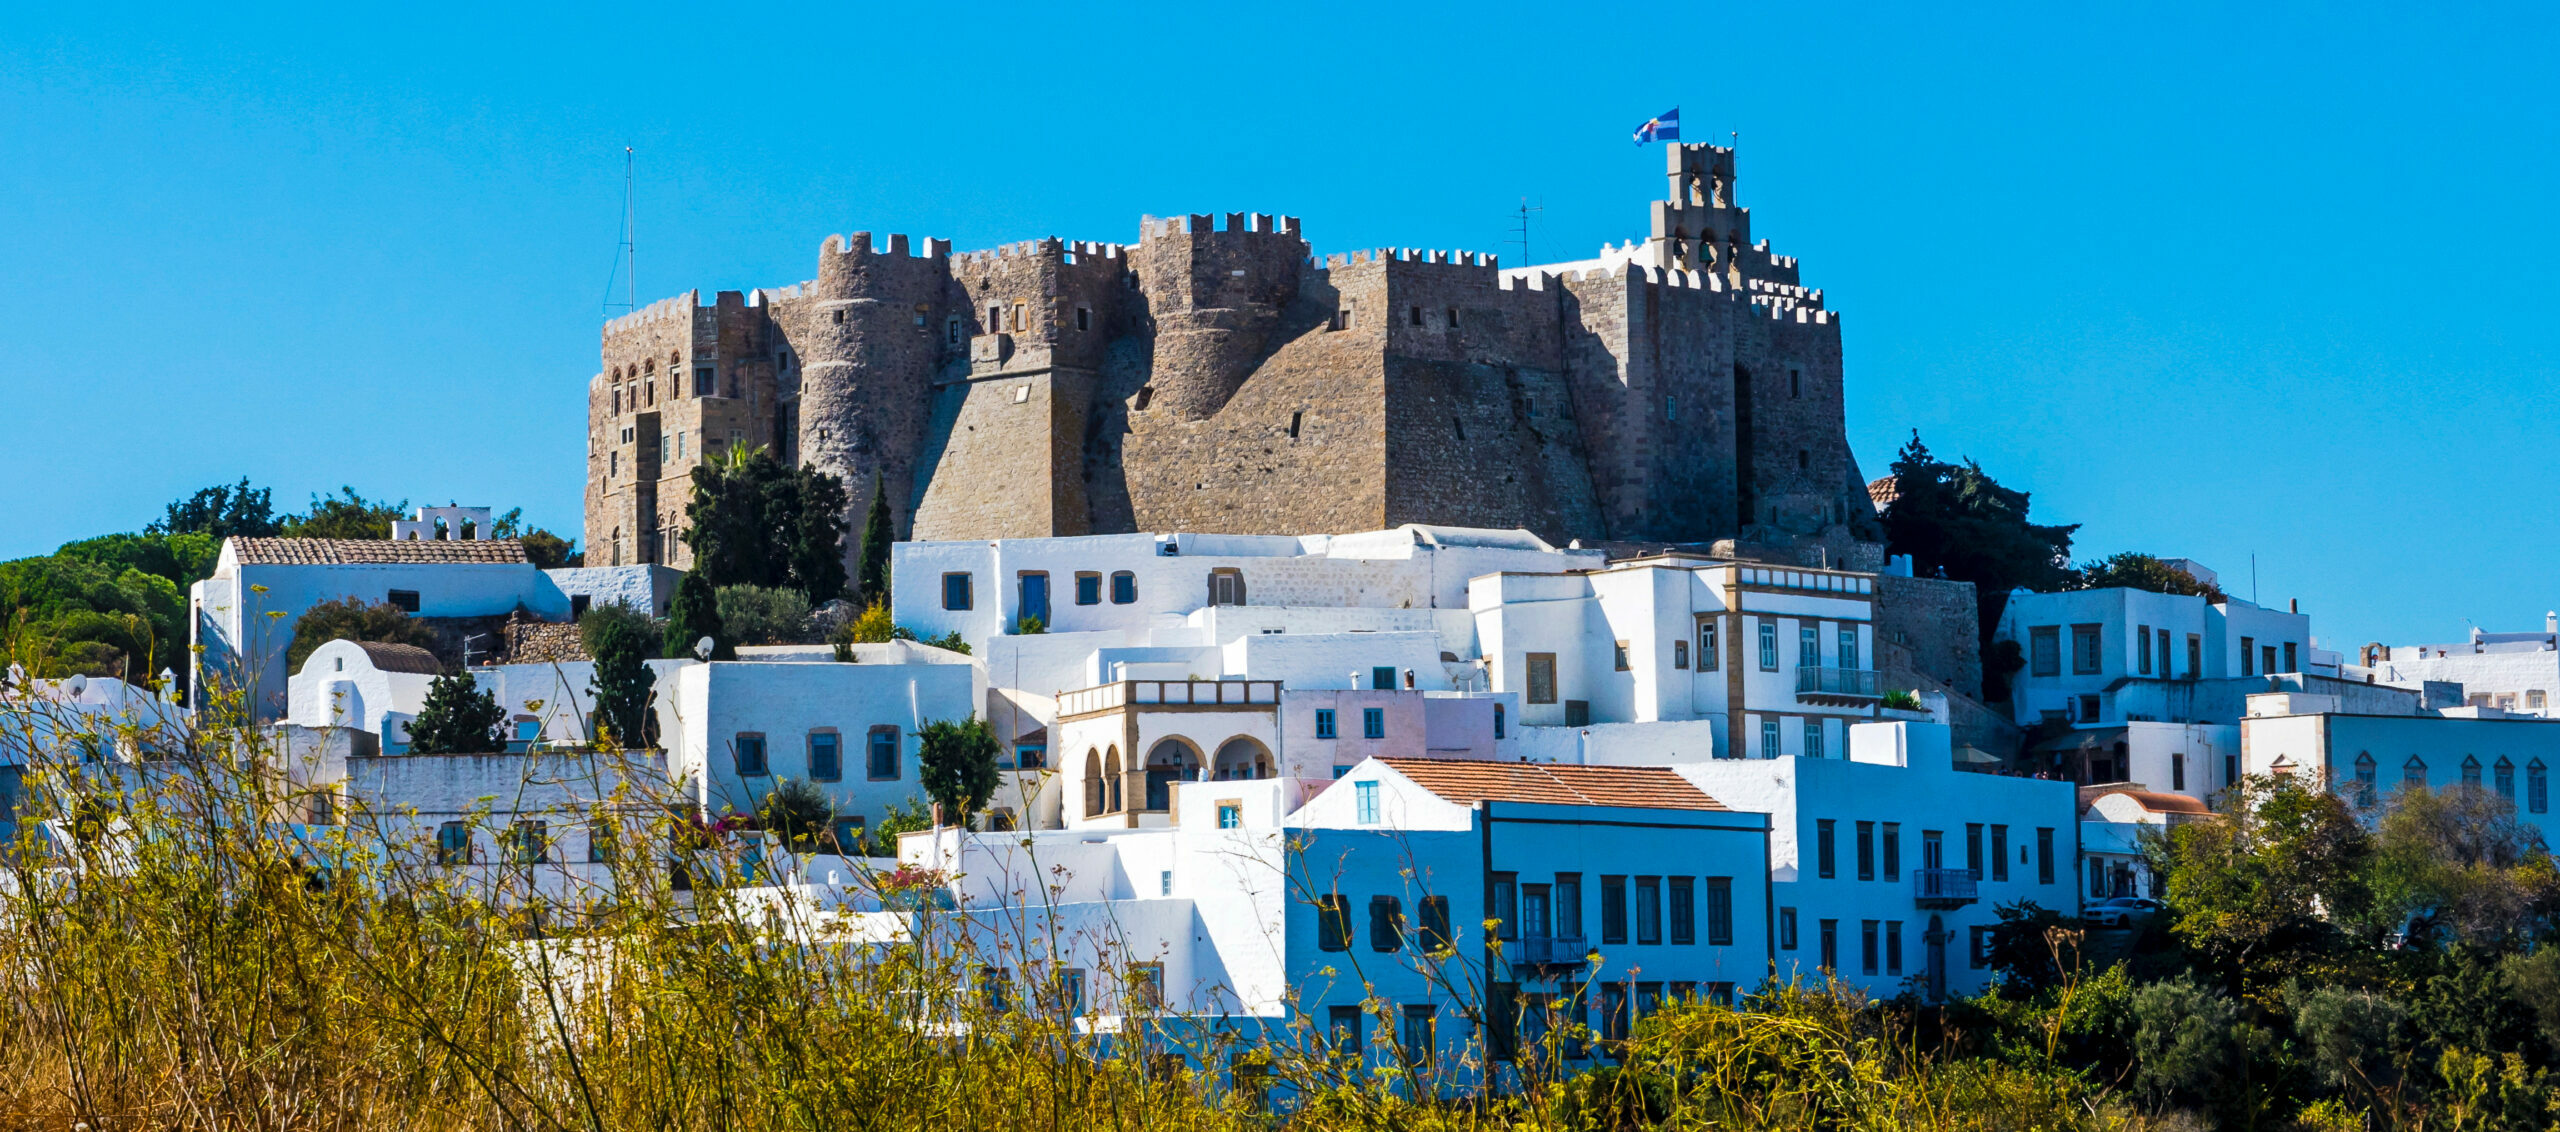 Patmos island: The Cave of the revelation, a place of peace and devoutness